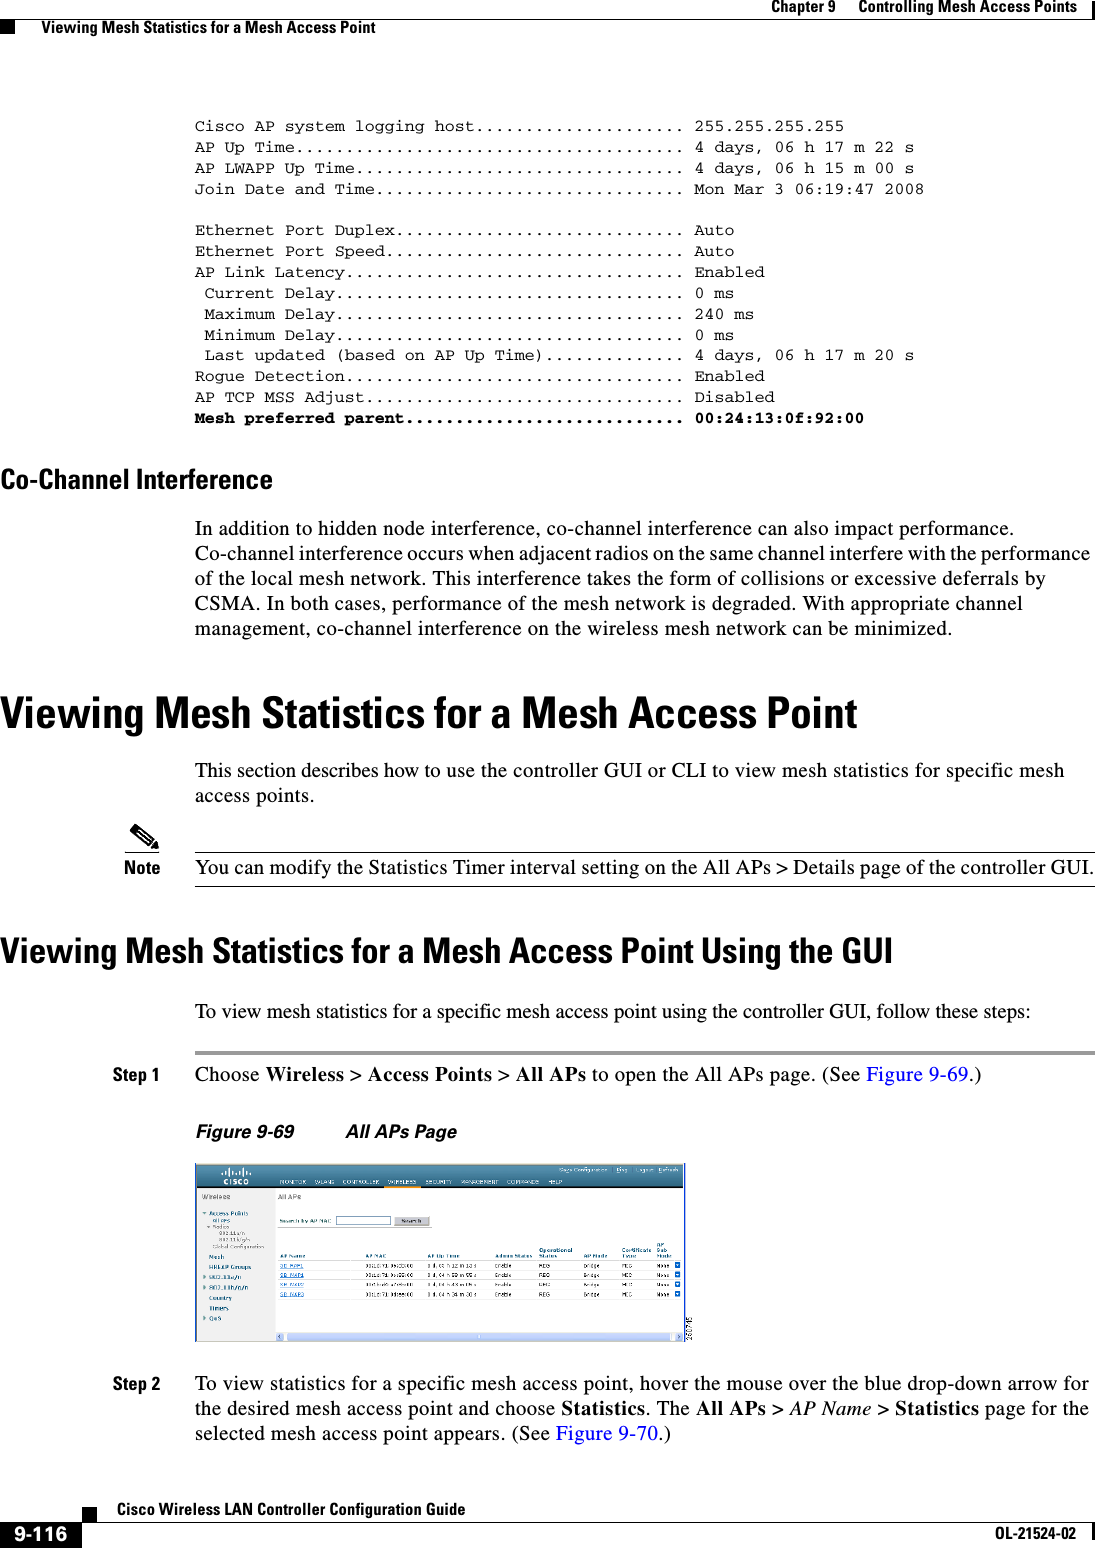  9-116Cisco Wireless LAN Controller Configuration GuideOL-21524-02Chapter 9      Controlling Mesh Access Points  Viewing Mesh Statistics for a Mesh Access PointCisco AP system logging host..................... 255.255.255.255AP Up Time....................................... 4 days, 06 h 17 m 22 sAP LWAPP Up Time................................. 4 days, 06 h 15 m 00 sJoin Date and Time............................... Mon Mar 3 06:19:47 2008Ethernet Port Duplex............................. AutoEthernet Port Speed.............................. AutoAP Link Latency.................................. Enabled Current Delay................................... 0 ms Maximum Delay................................... 240 ms Minimum Delay................................... 0 ms Last updated (based on AP Up Time).............. 4 days, 06 h 17 m 20 sRogue Detection.................................. EnabledAP TCP MSS Adjust................................ DisabledMesh preferred parent............................ 00:24:13:0f:92:00Co-Channel InterferenceIn addition to hidden node interference, co-channel interference can also impact performance. Co-channel interference occurs when adjacent radios on the same channel interfere with the performance of the local mesh network. This interference takes the form of collisions or excessive deferrals by CSMA. In both cases, performance of the mesh network is degraded. With appropriate channel management, co-channel interference on the wireless mesh network can be minimized.Viewing Mesh Statistics for a Mesh Access PointThis section describes how to use the controller GUI or CLI to view mesh statistics for specific mesh access points.Note You can modify the Statistics Timer interval setting on the All APs &gt; Details page of the controller GUI.Viewing Mesh Statistics for a Mesh Access Point Using the GUITo view mesh statistics for a specific mesh access point using the controller GUI, follow these steps:Step 1 Choose Wireless &gt; Access Points &gt; All APs to open the All APs page. (See Figure 9-69.)Figure 9-69 All APs PageStep 2 To view statistics for a specific mesh access point, hover the mouse over the blue drop-down arrow for the desired mesh access point and choose Statistics. The All APs &gt; AP Name &gt; Statistics page for the selected mesh access point appears. (See Figure 9-70.)